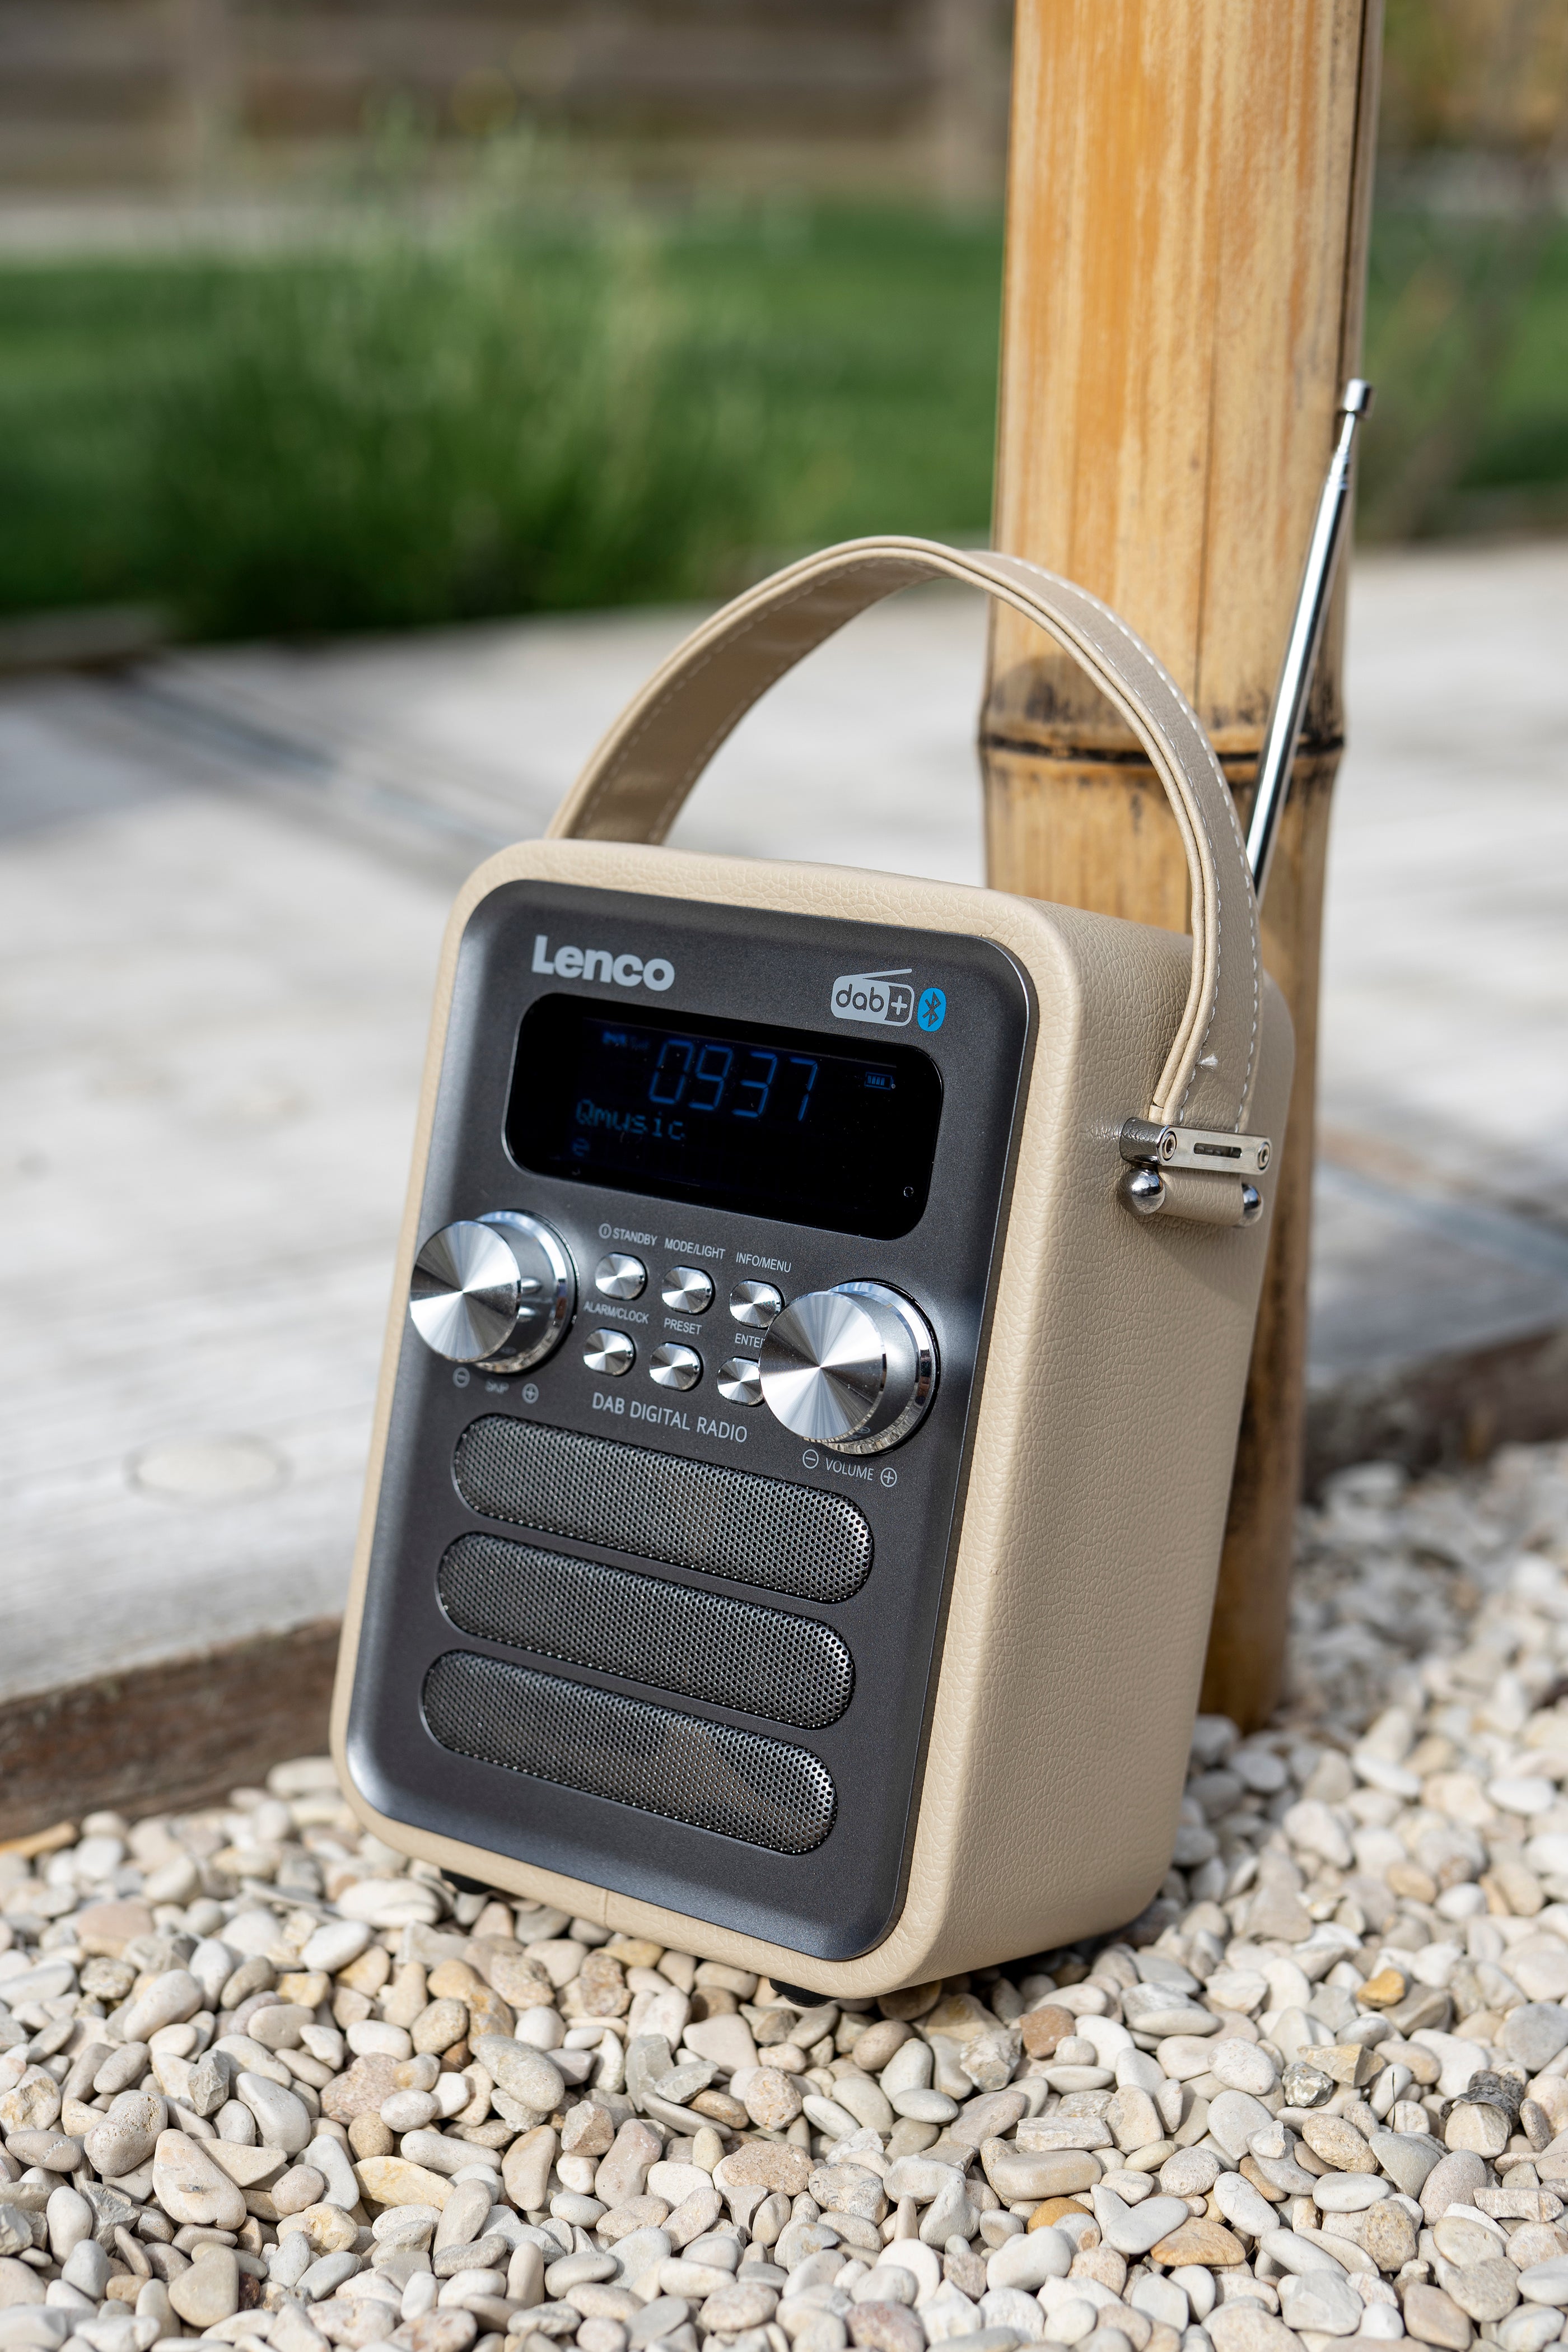 Radios from Lenco! Now the shop official in